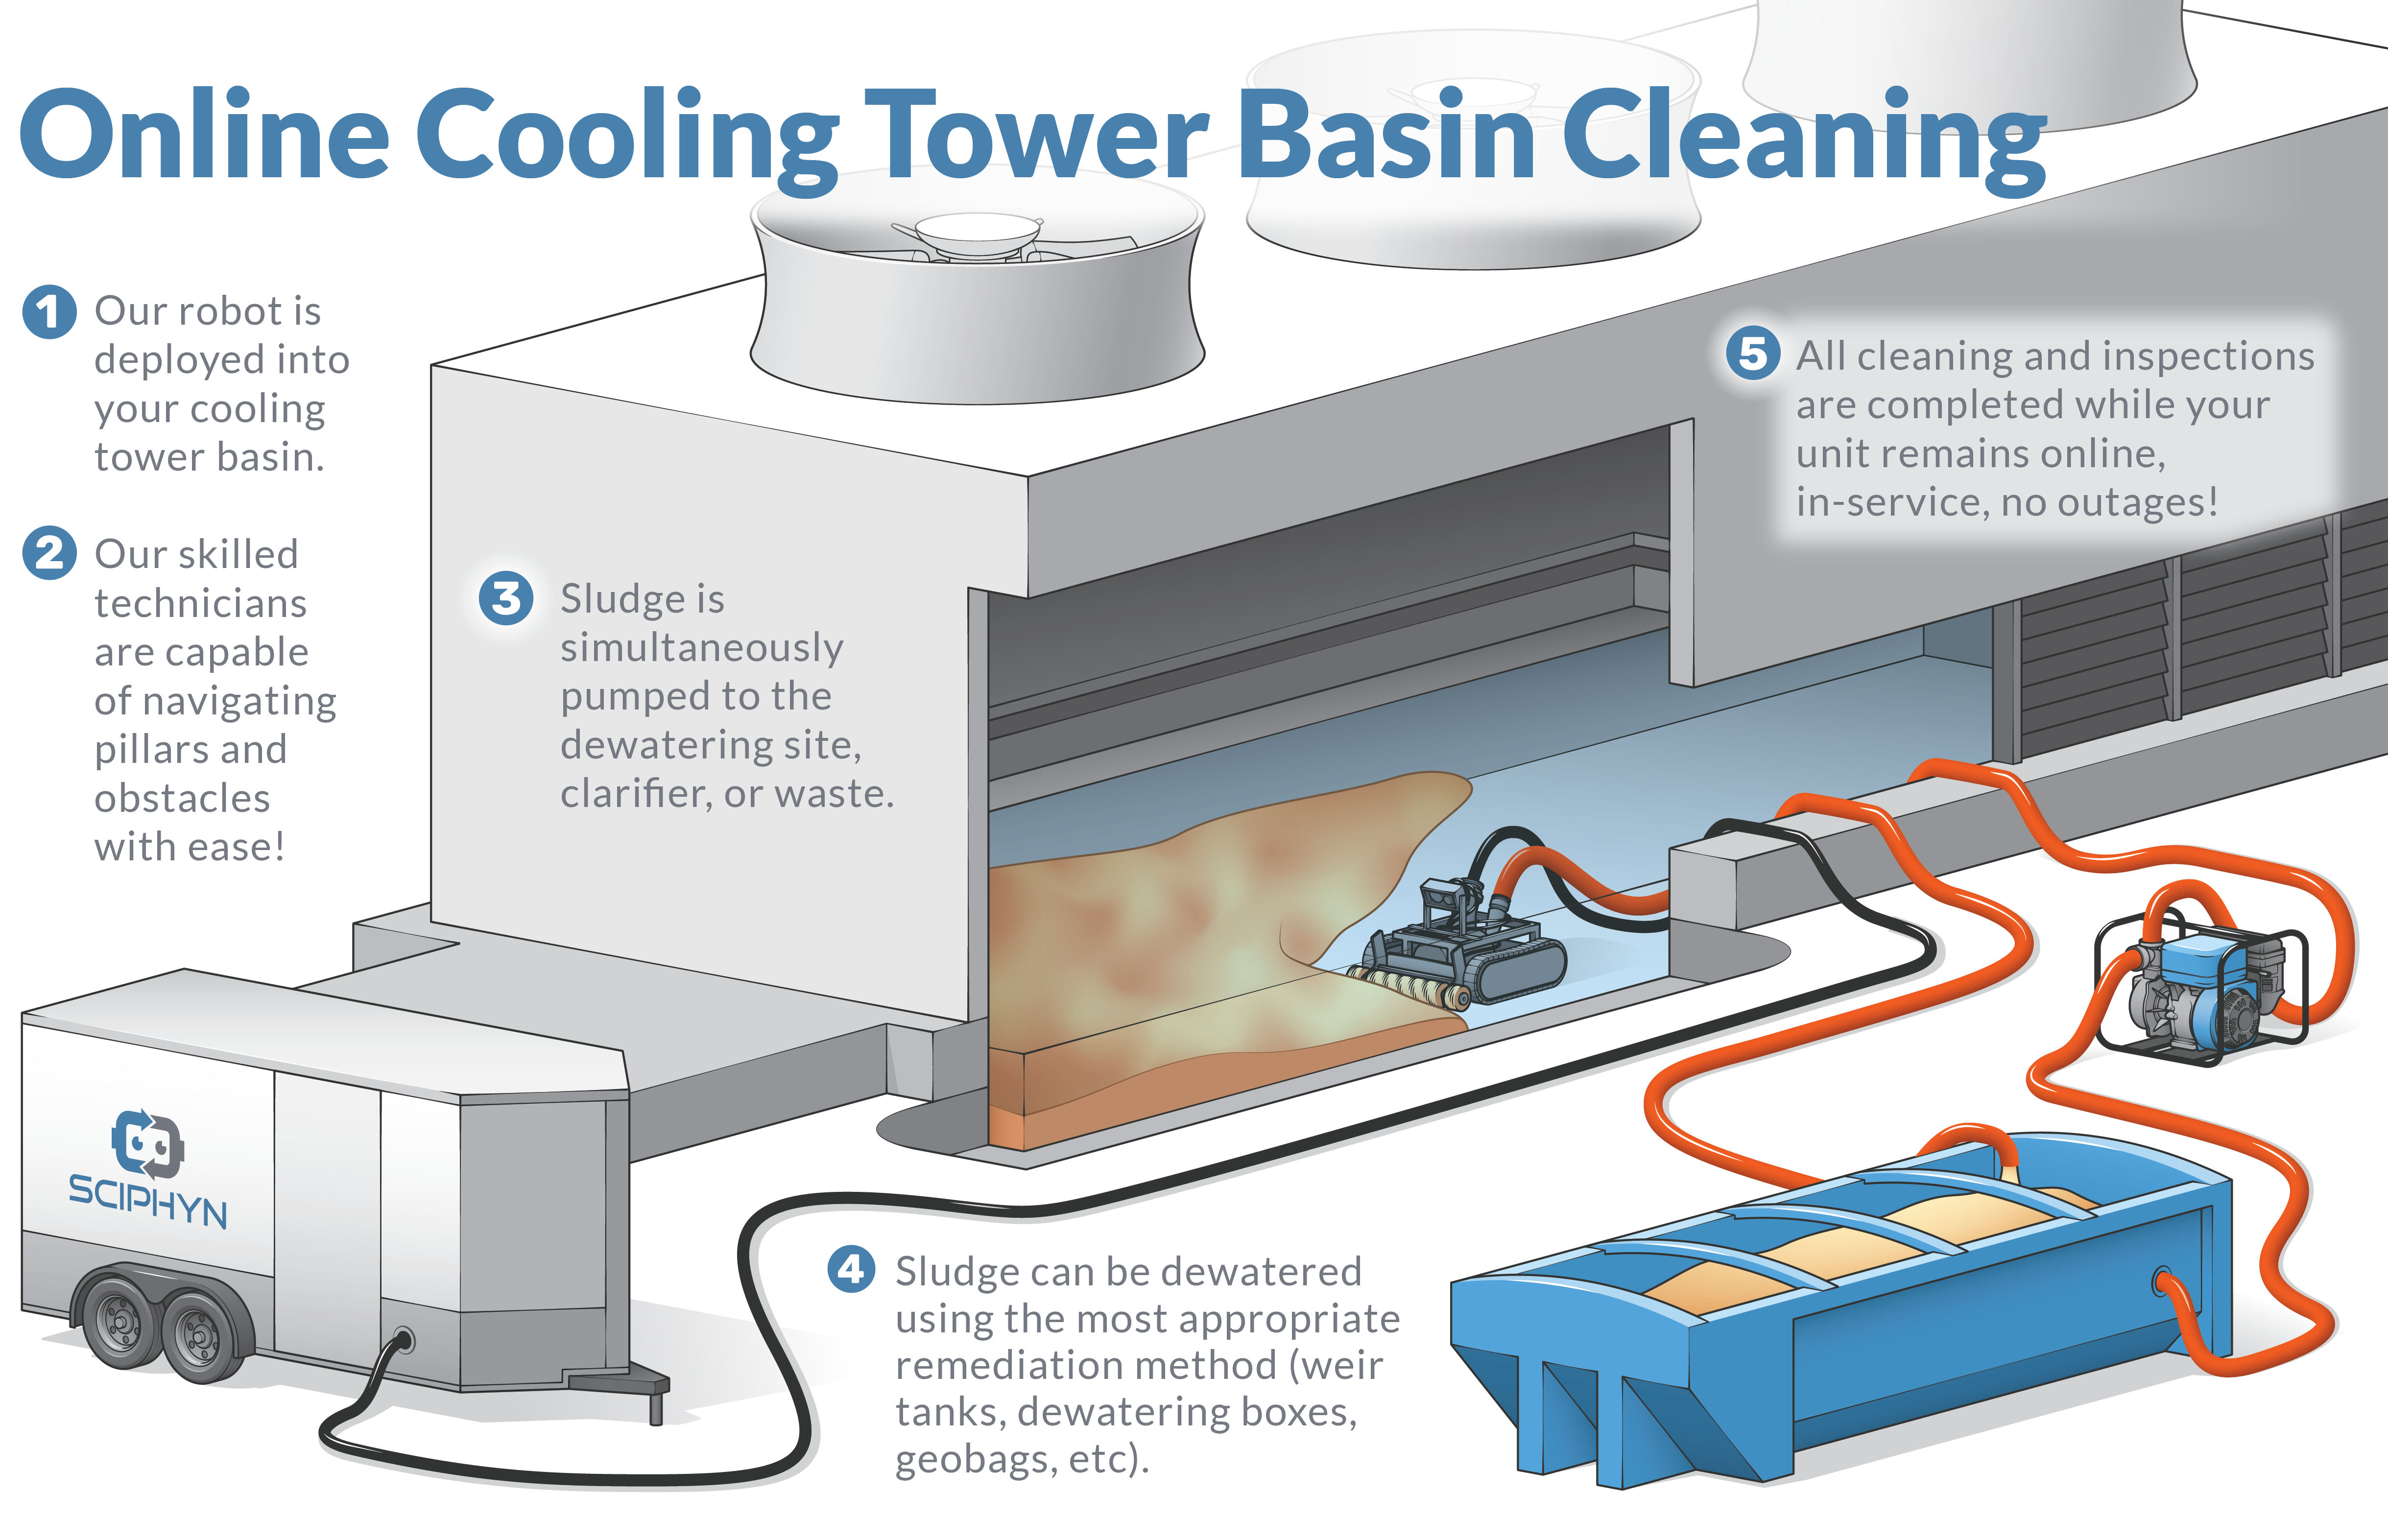 robotic sludge removal from a cooling tower basin